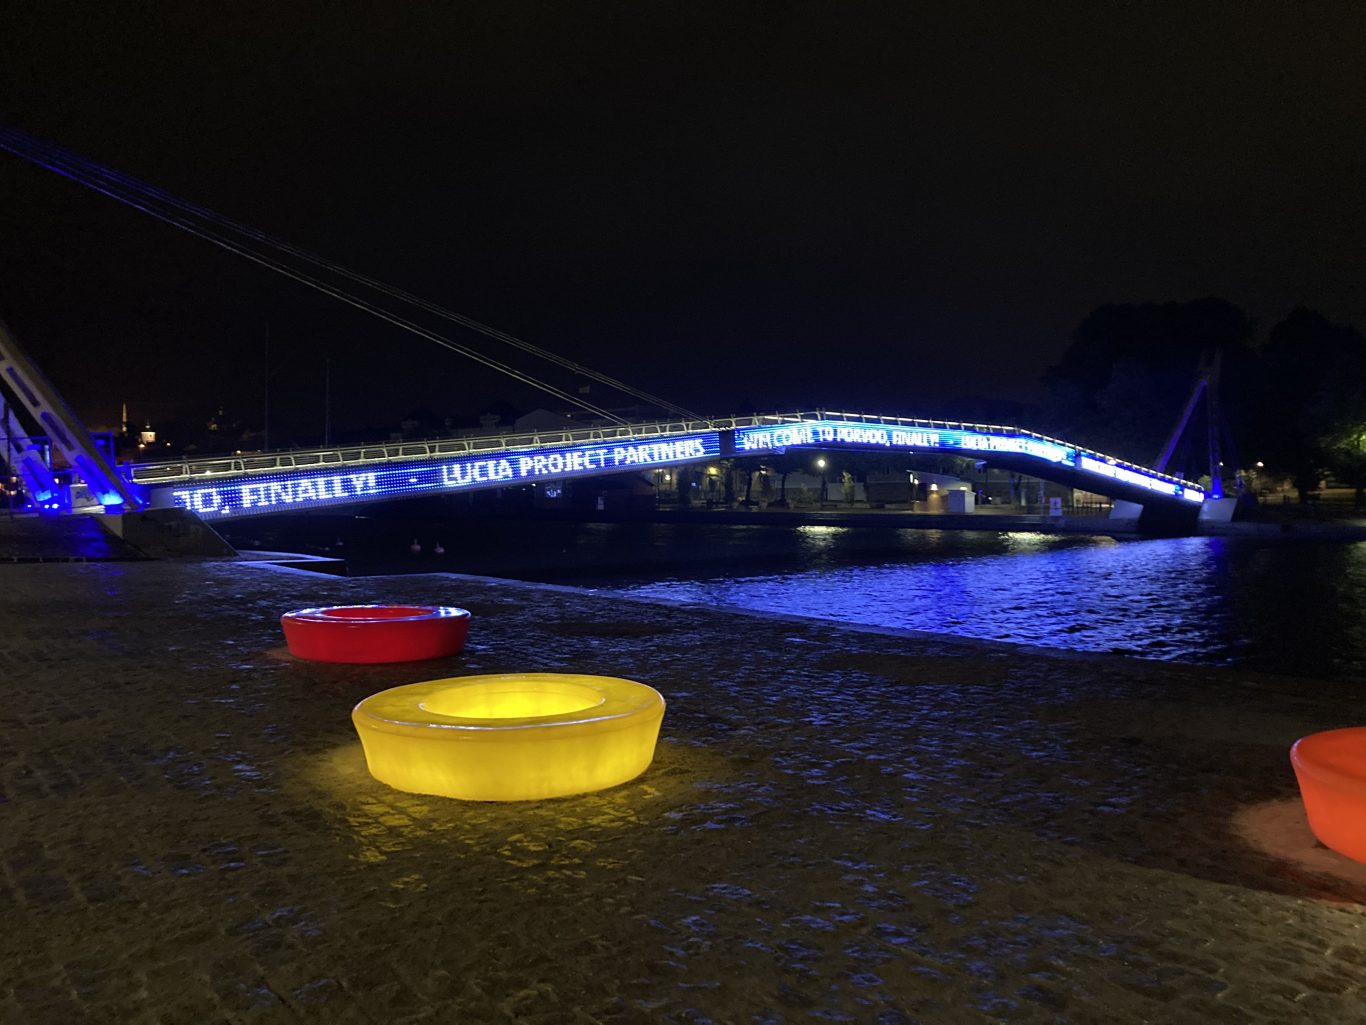 Smart lights lit up in Porvoo – the LUCIA project has been completed